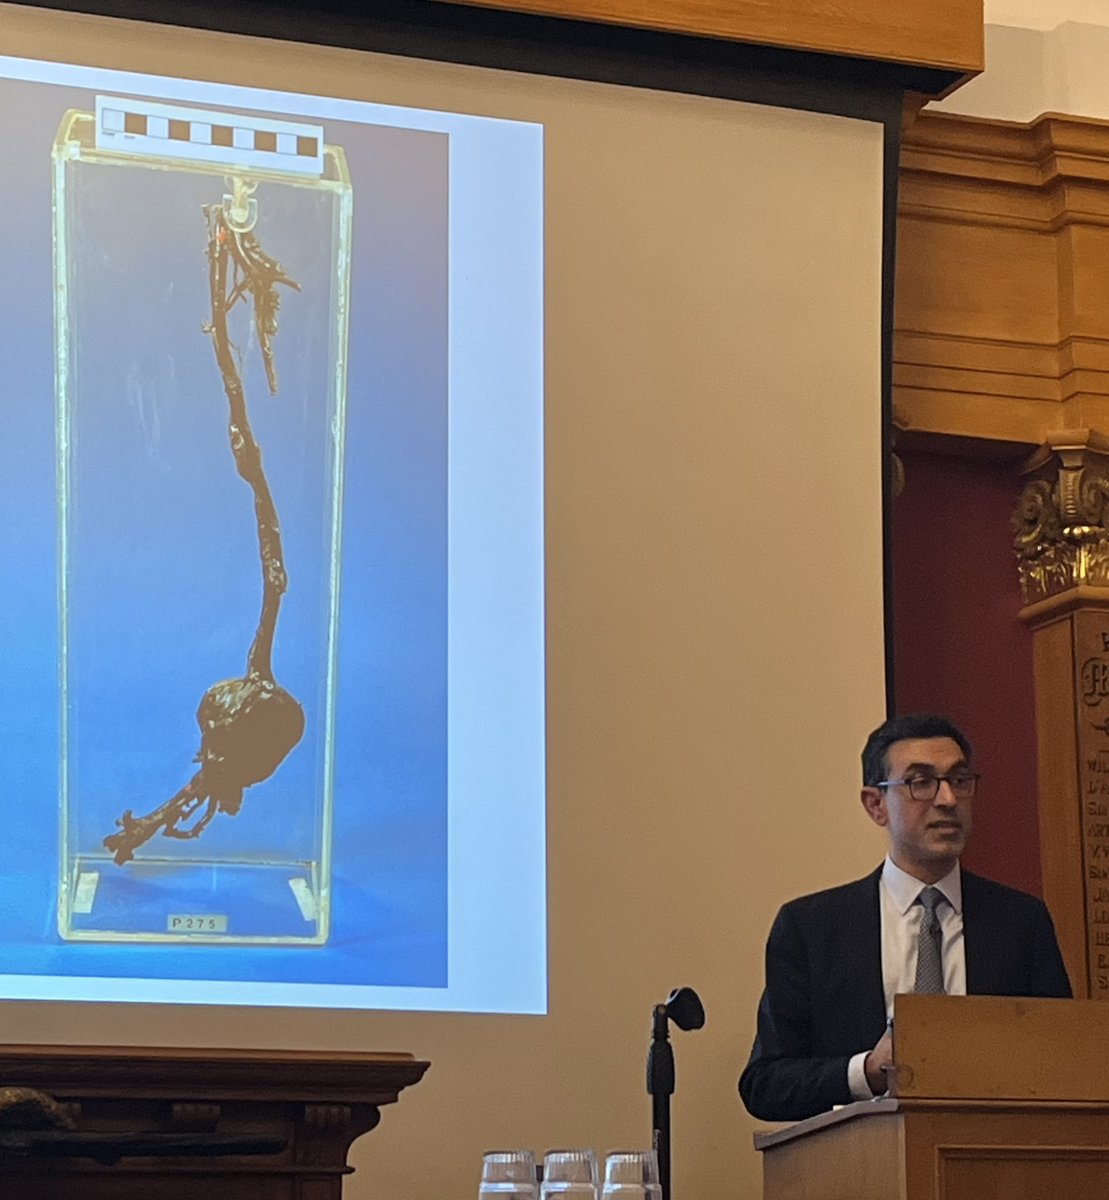 Wonderful talk by @b_modarai at the @HunterianSoc this evening on aortic aneurysms and the options for endovascular repair. Starting his talk with the popliteal aneurysms treated by John Hunter.